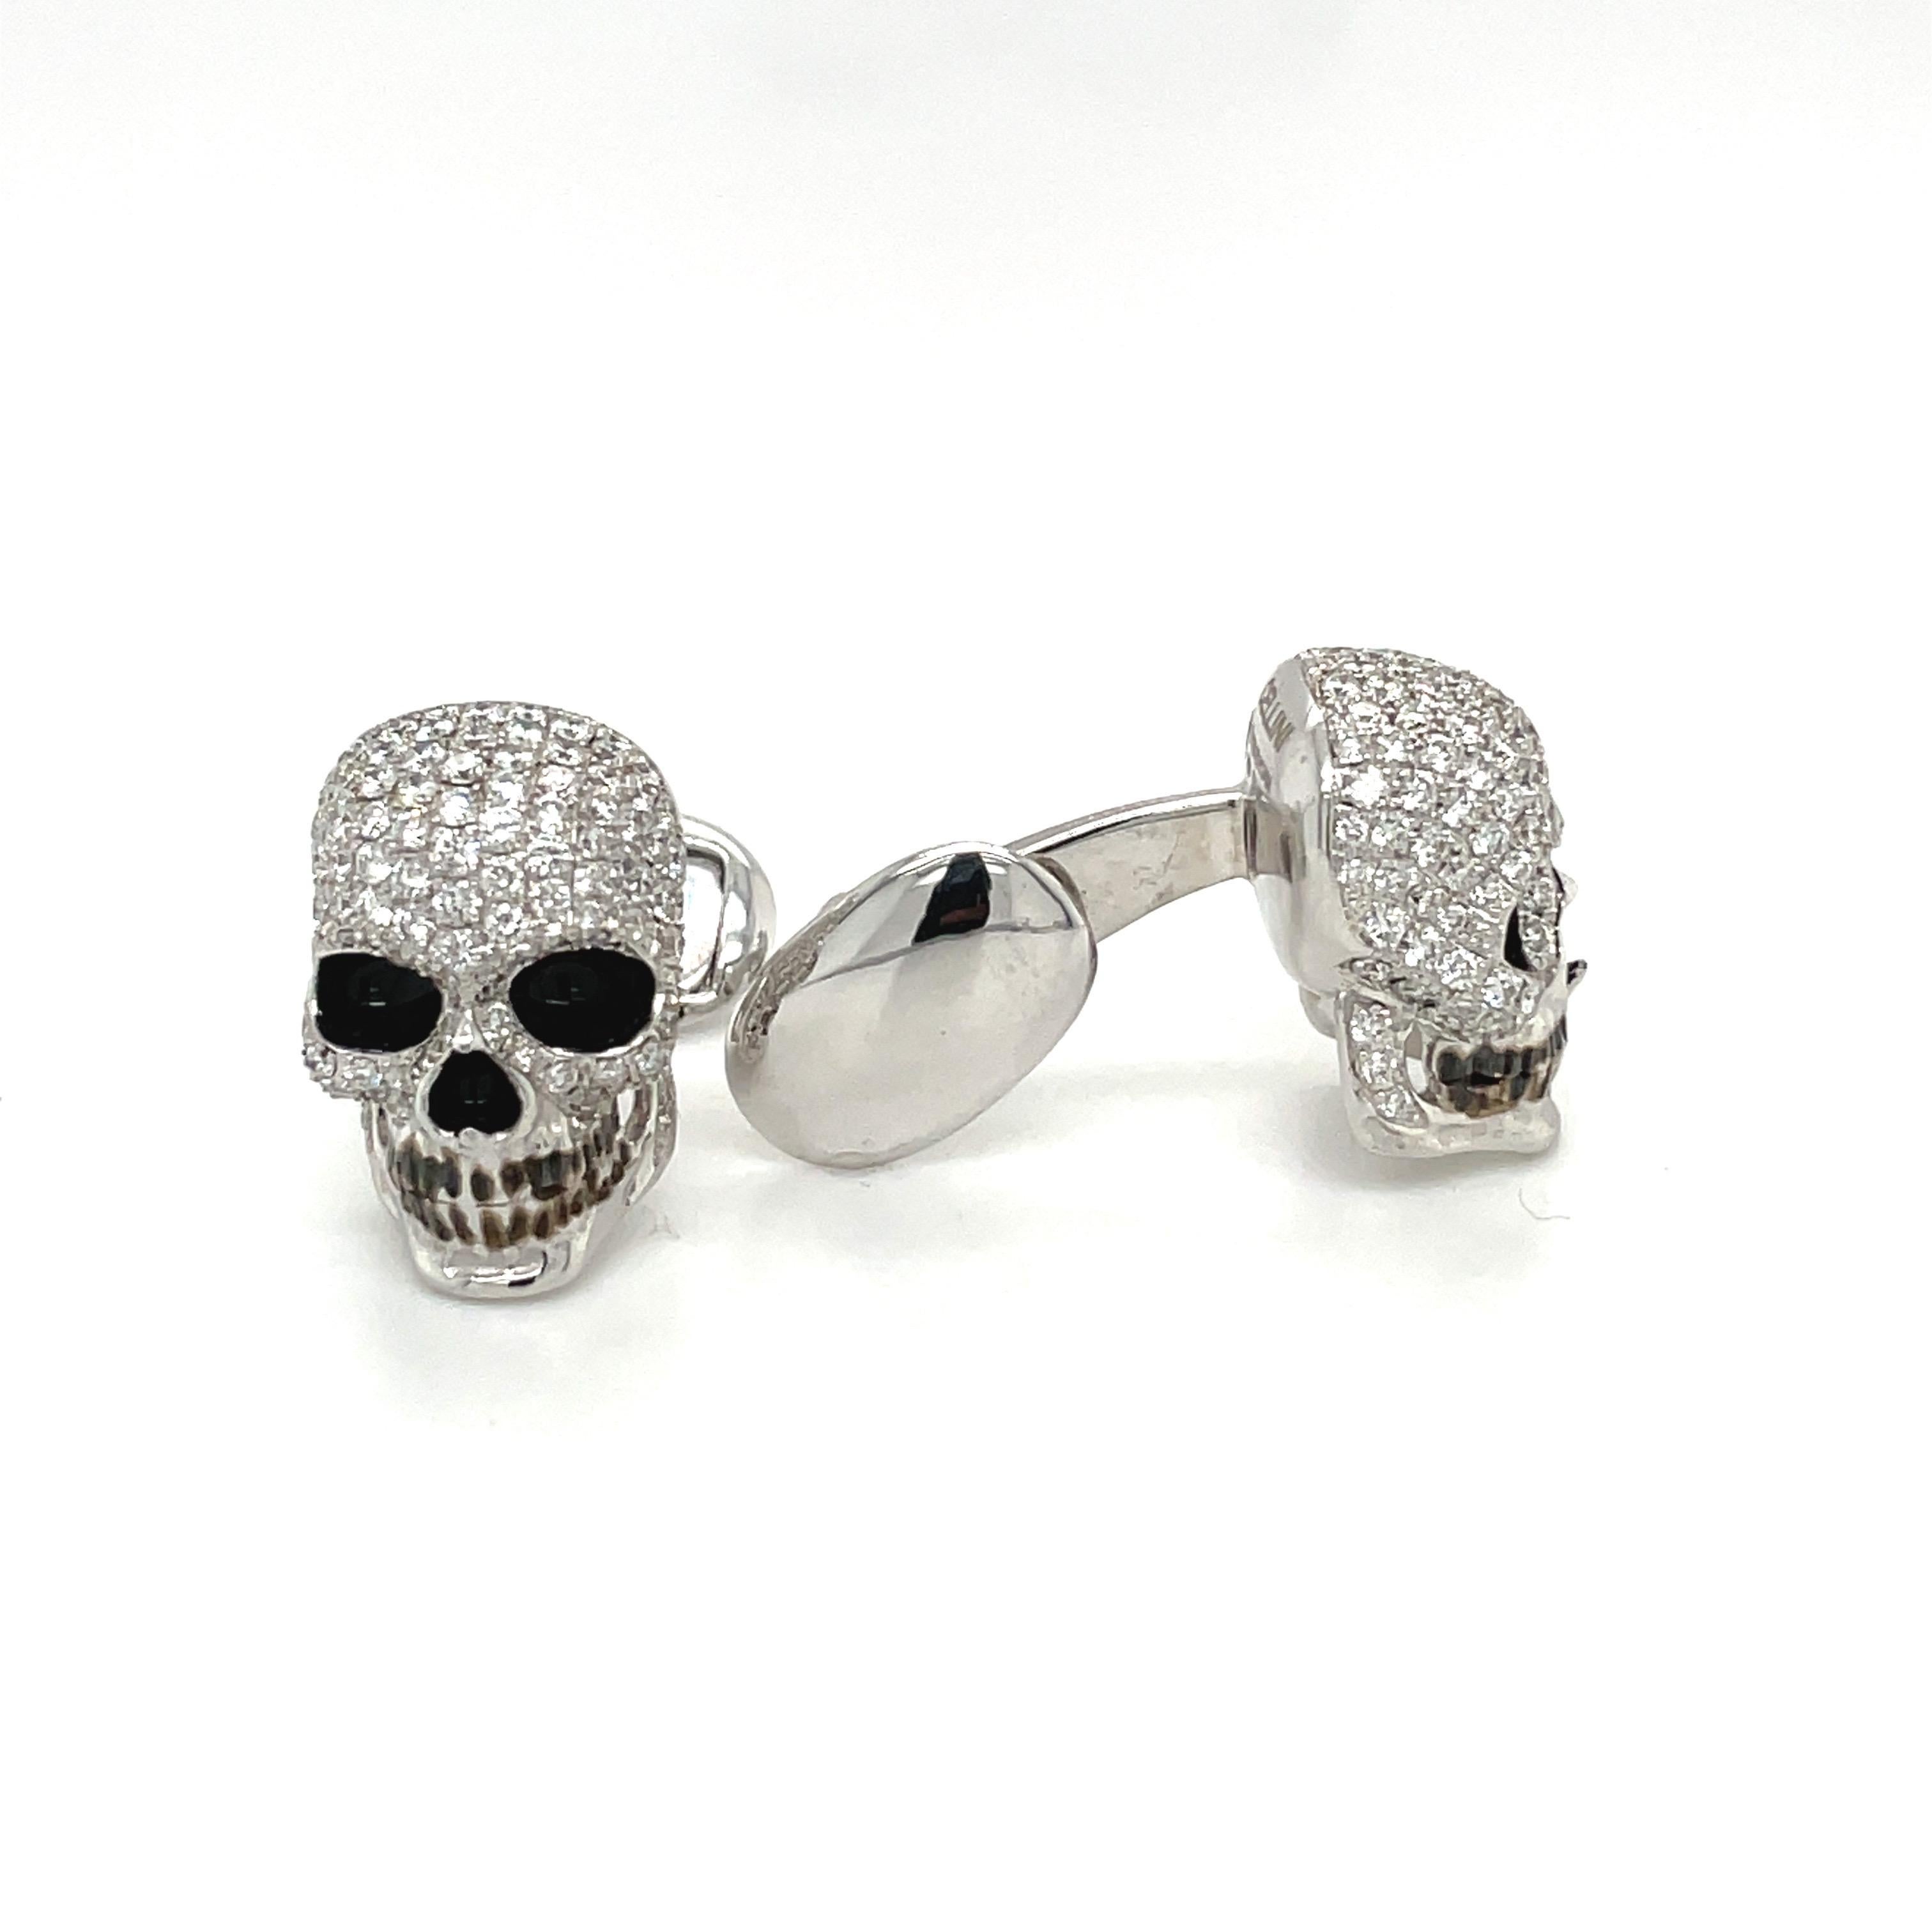 Beautifully designed 18 Karat white gold skull head cuff links. The skulls are pave set with 236 round brilliant diamonds. The hollowed out eyes and nose are enameled in black.
Stamped Cellini 750 1.25
Total diamond weight 2.50 carats